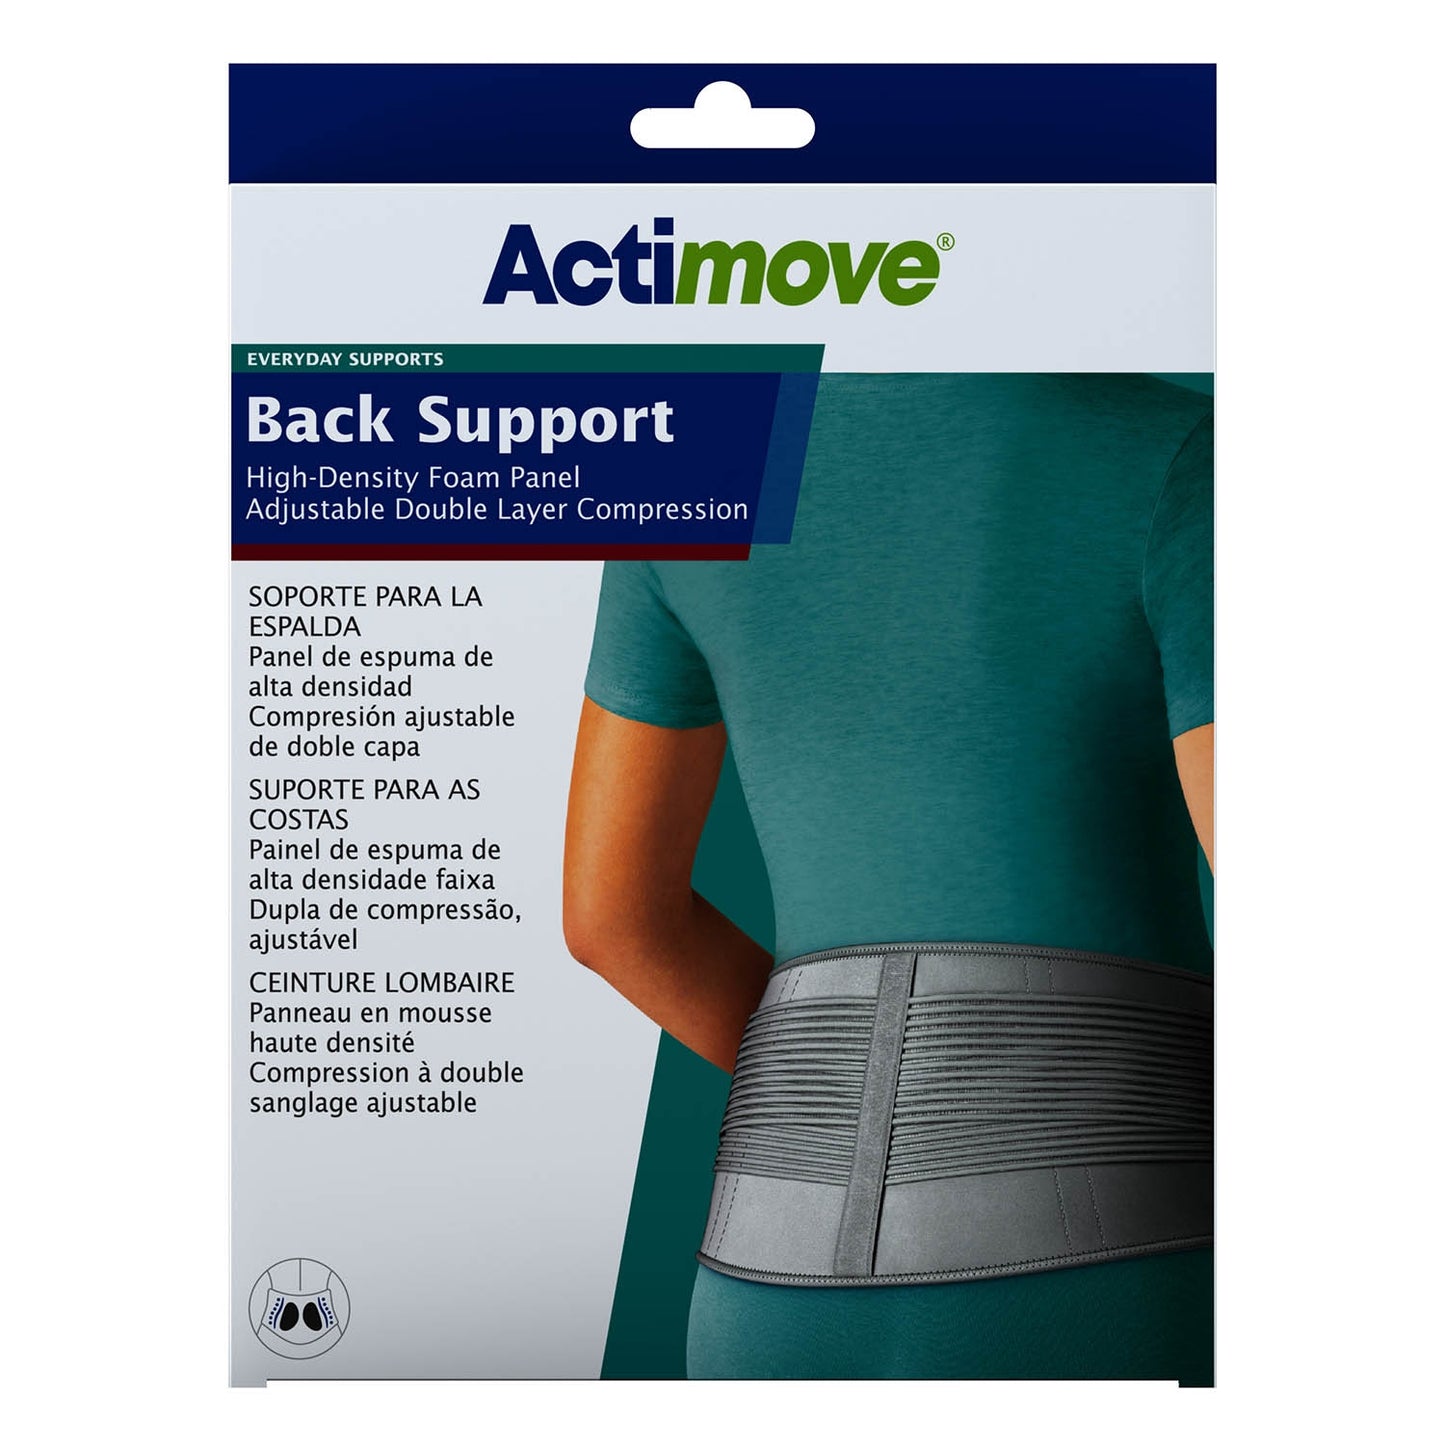 Actimove LombaCare Back Support - Small/Medium